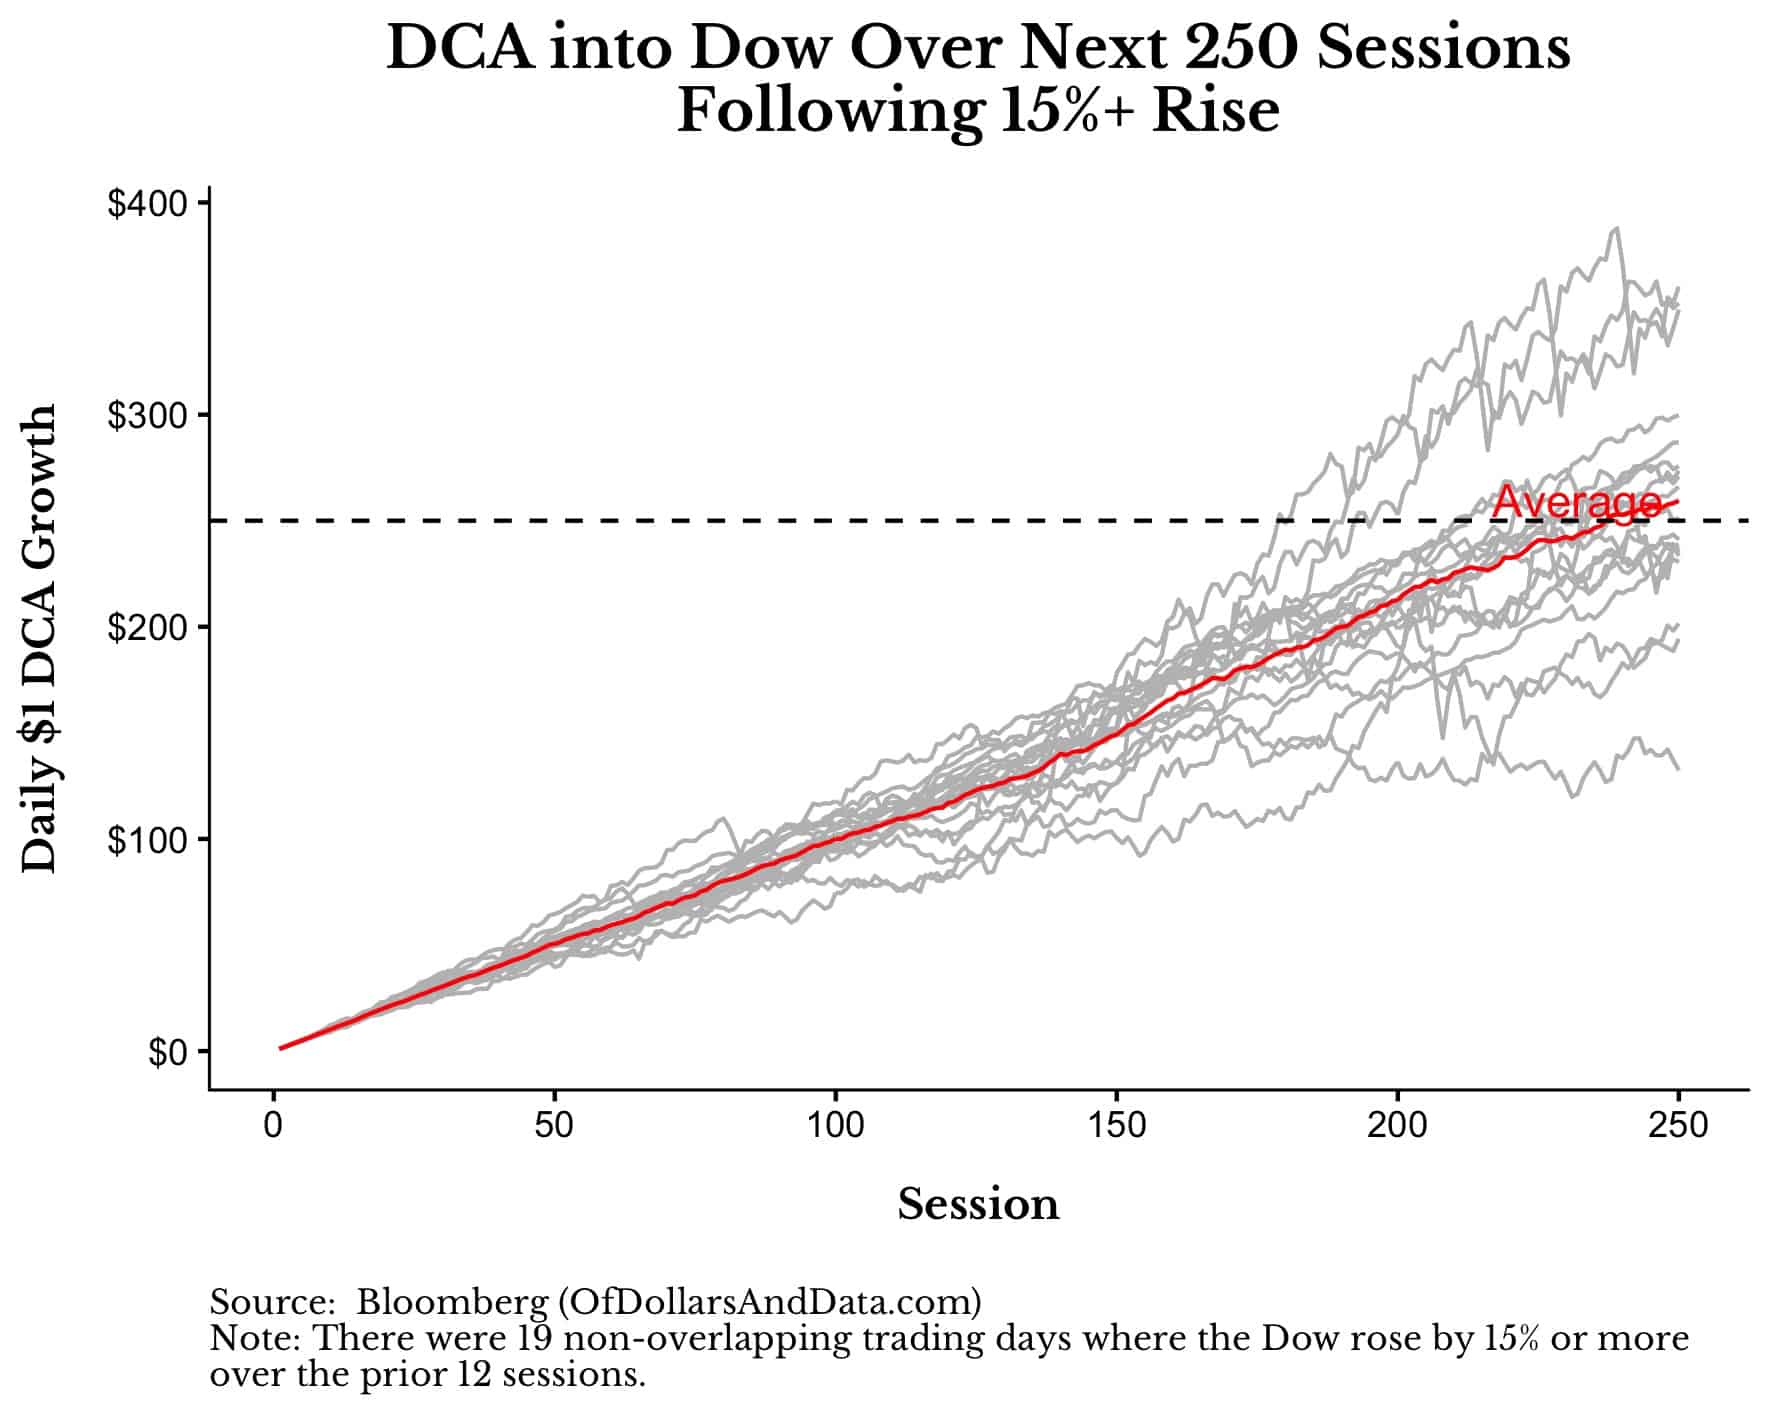 DCA into Dow over next 250 sessions following a 15% or greater rise in prices